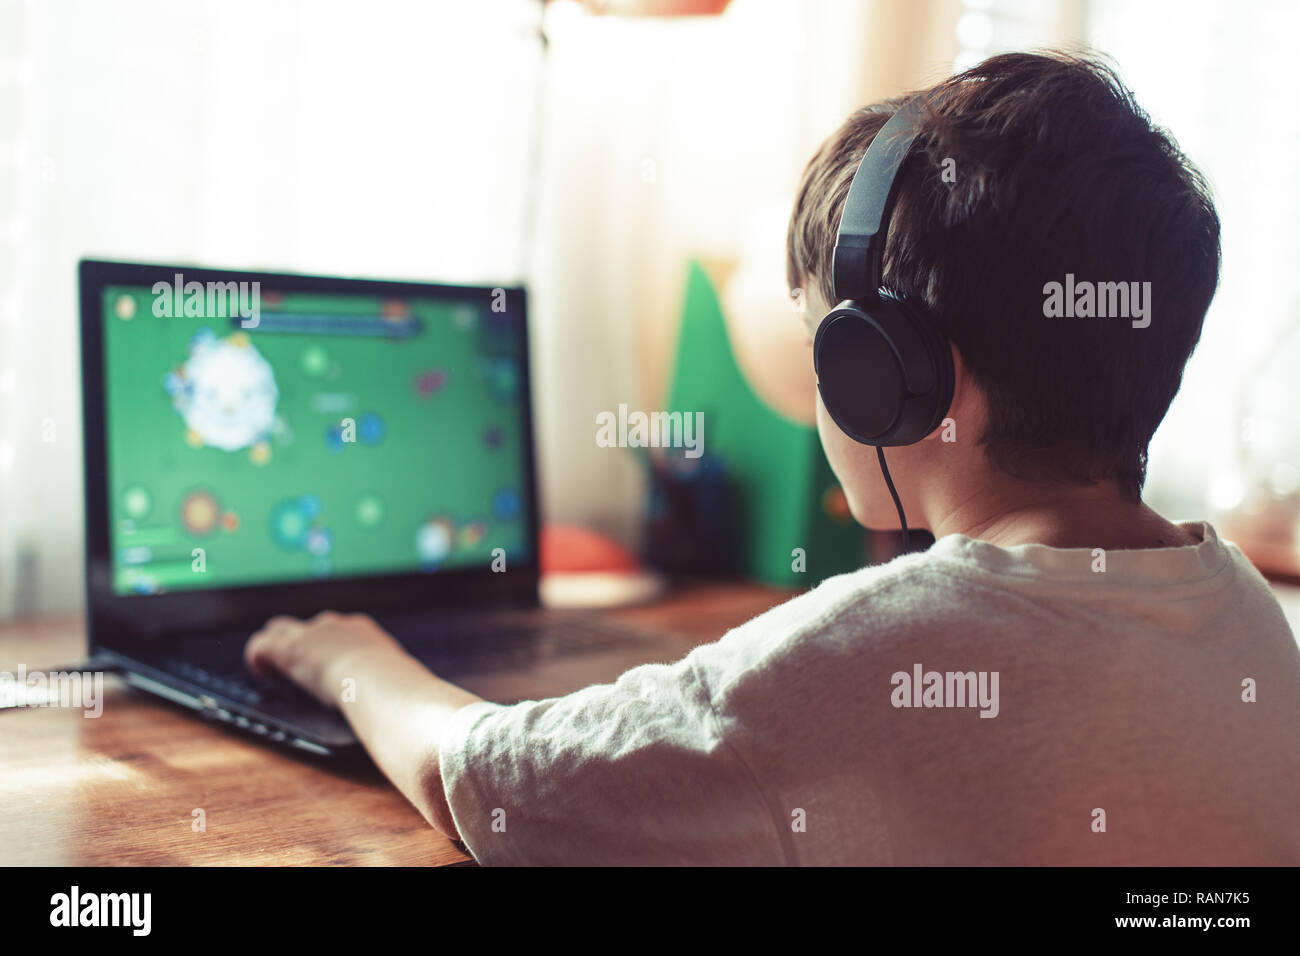 Gamer Boy Stock Photos and Pictures - 36,017 Images